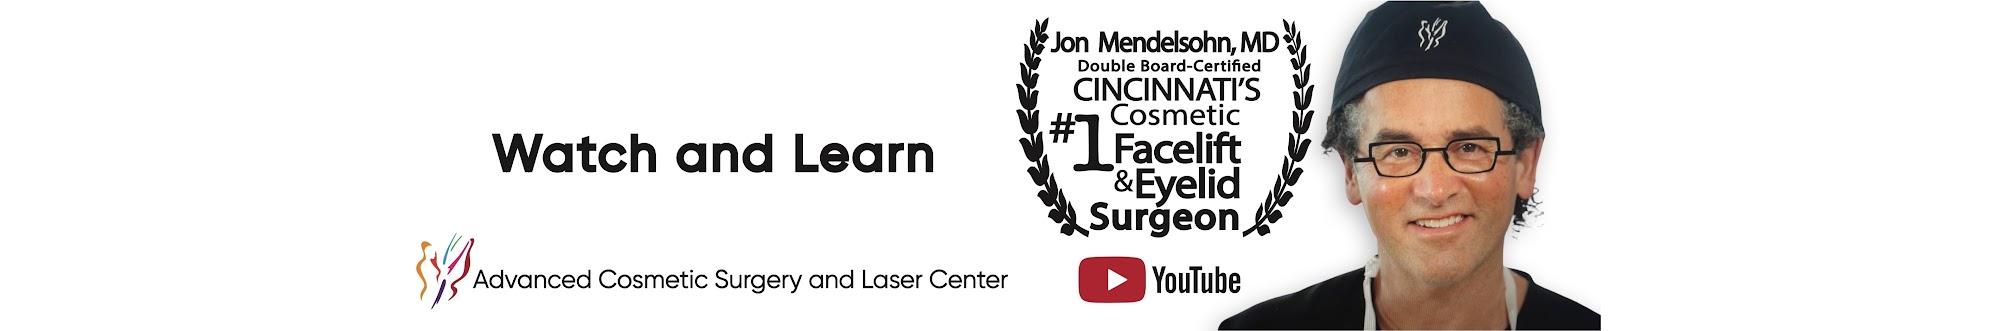 Advanced Cosmetic Surgery & Laser Center